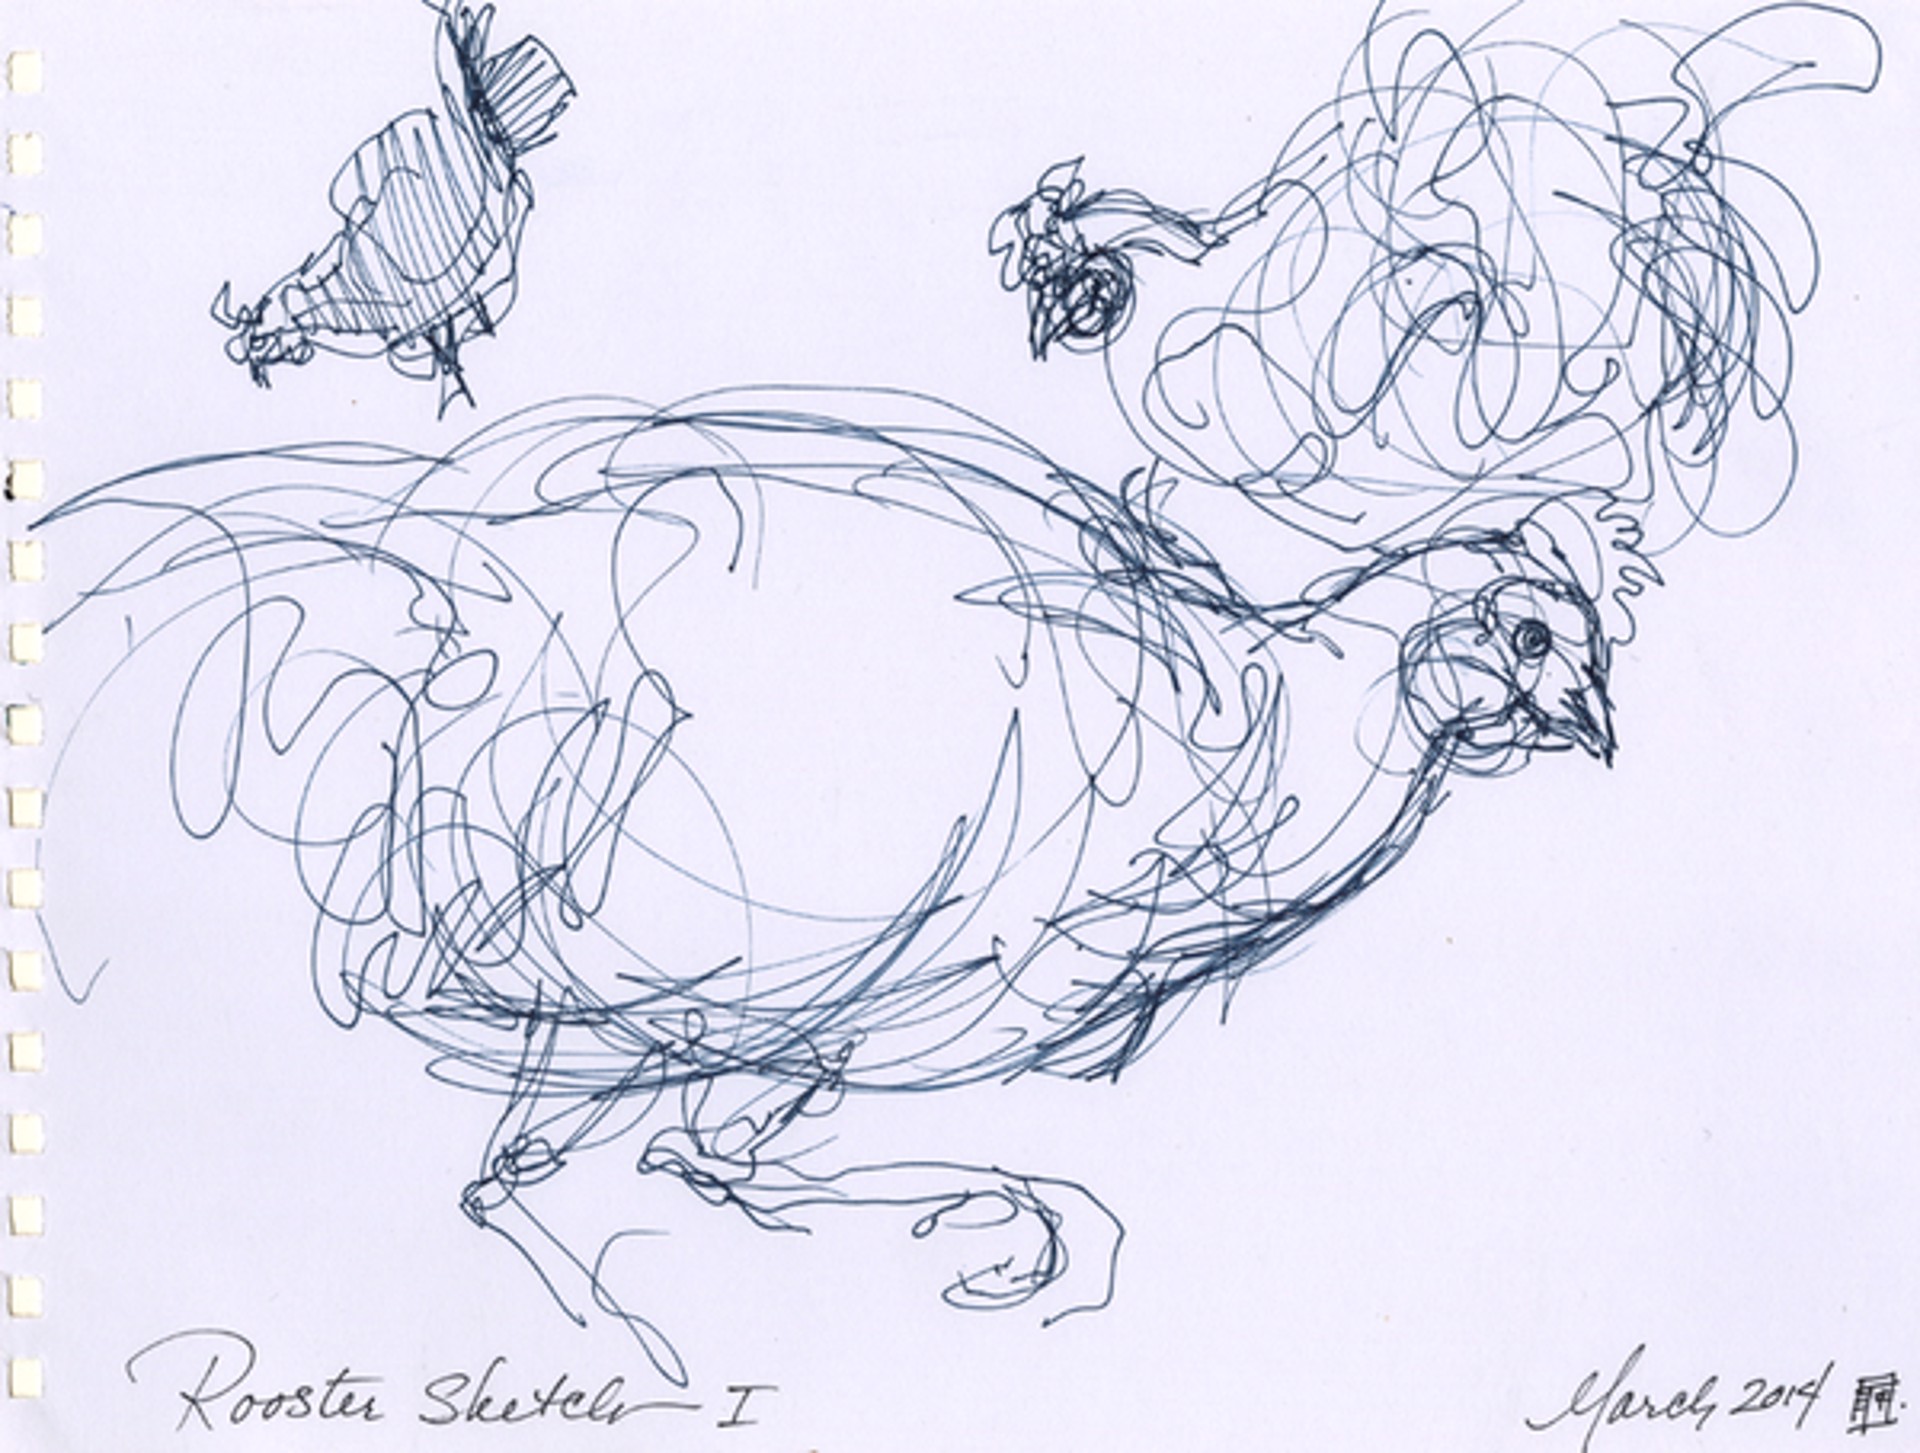 Rooster Sketch I by Tracey Padron